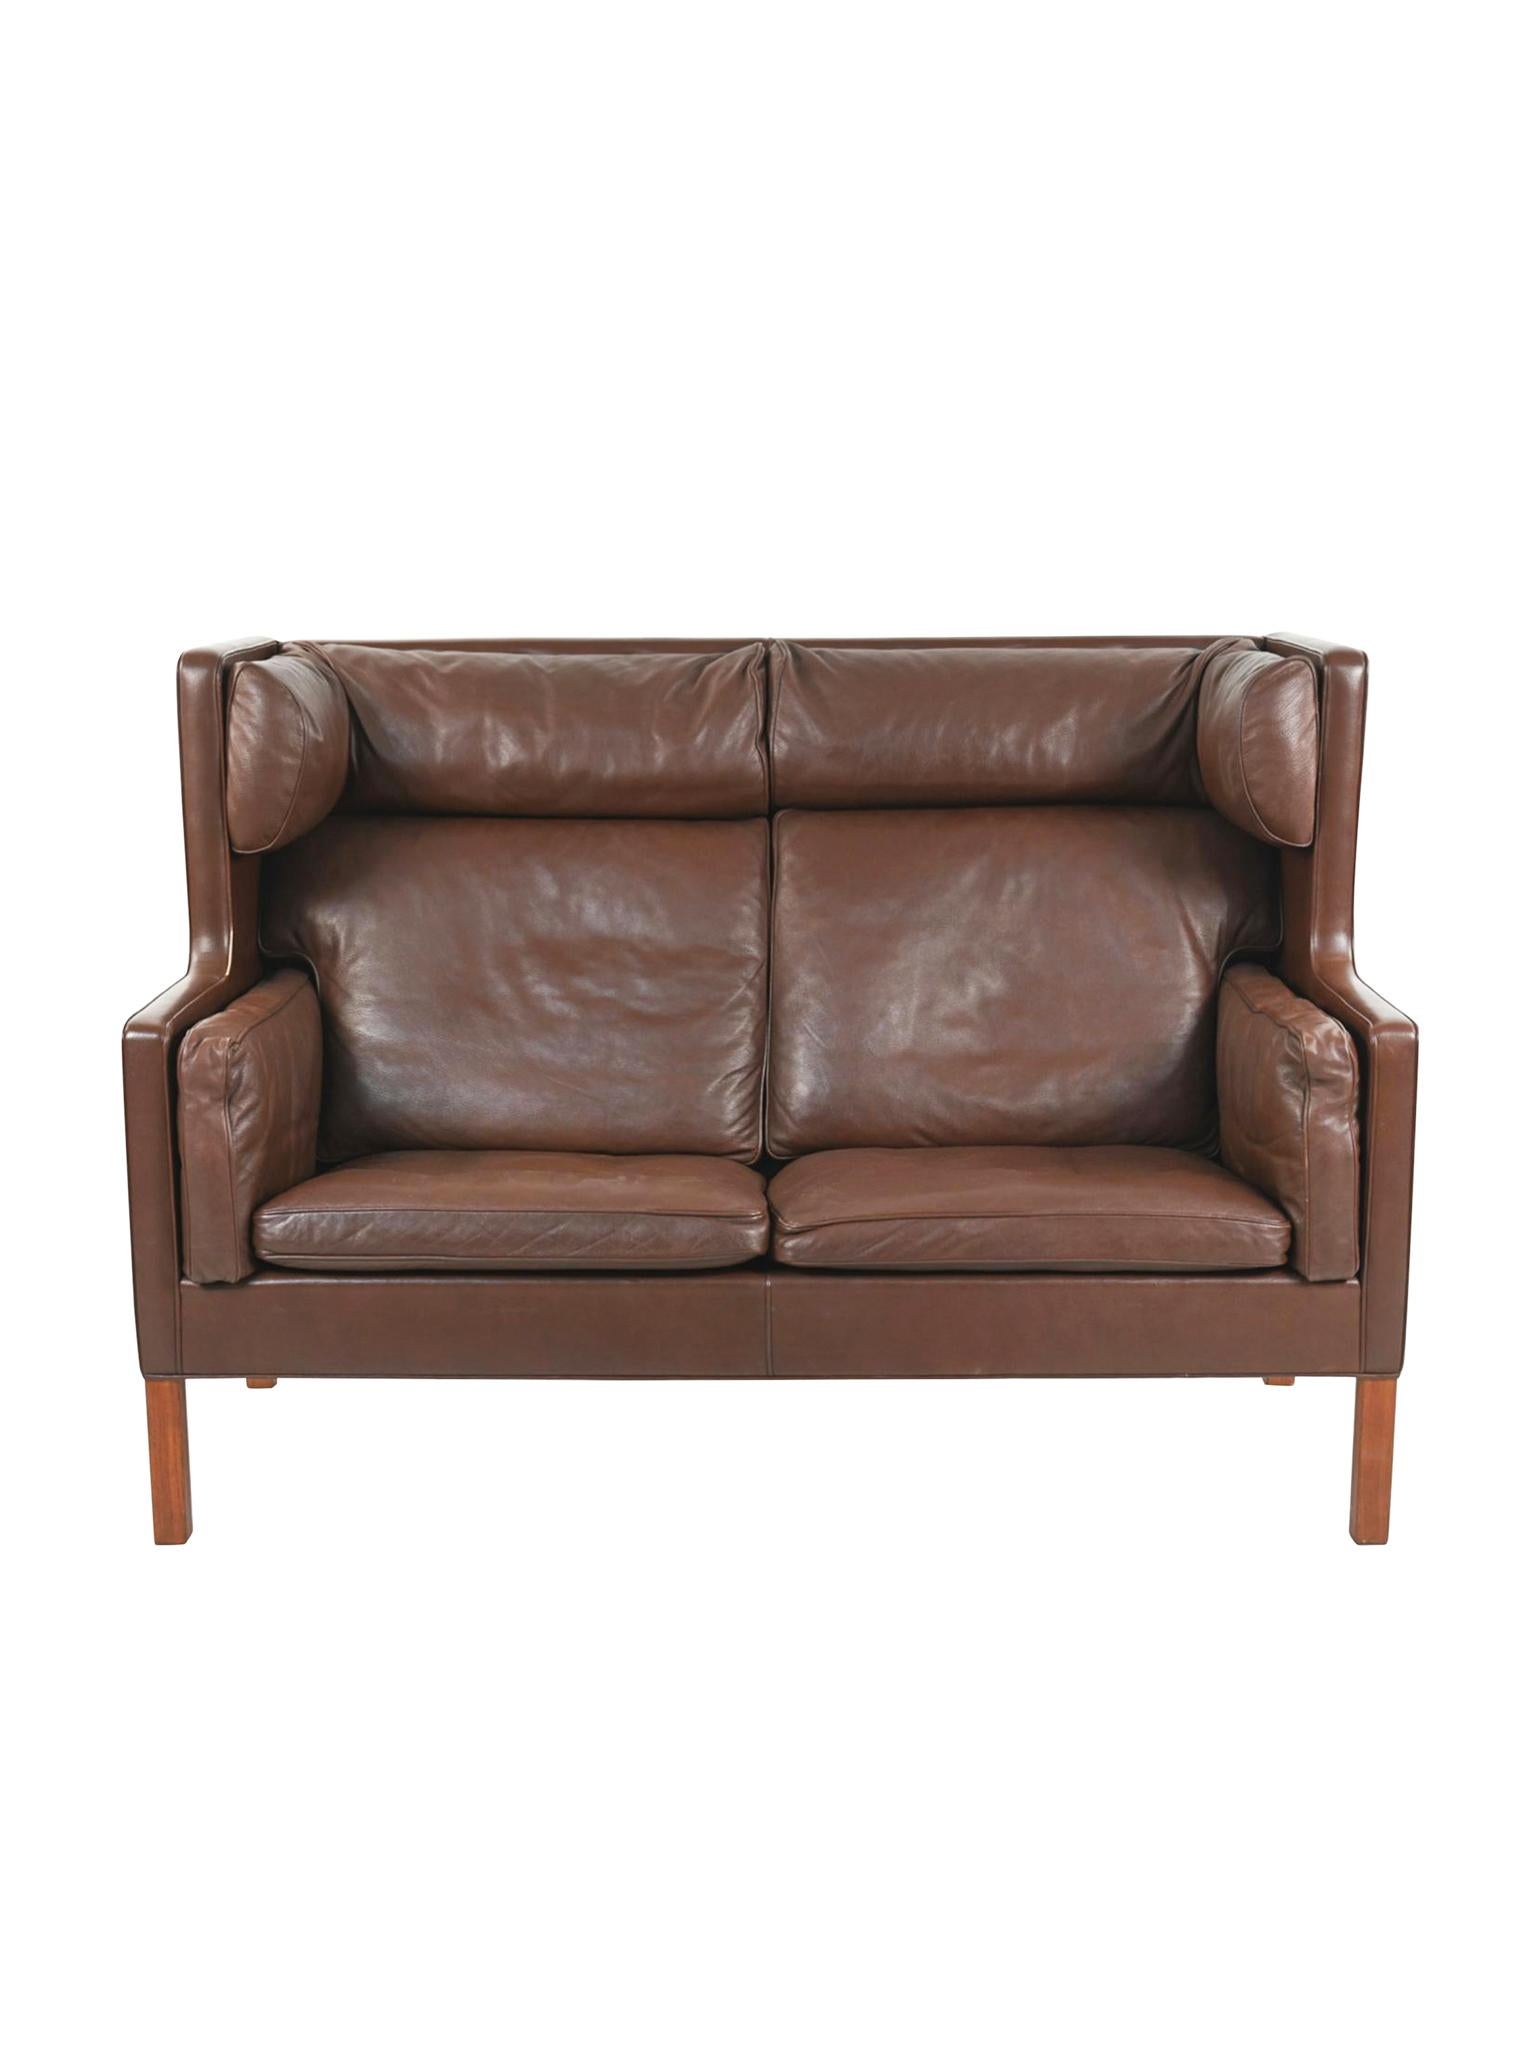 This semi-aniline brown leather coupé sofa was designed by Børge Mogensen for Fredericia in the 1960s. Structurally, the sofa has a high, cushioned back, reminiscent of a wingback armchair, inviting an upright but relaxed position. While the front